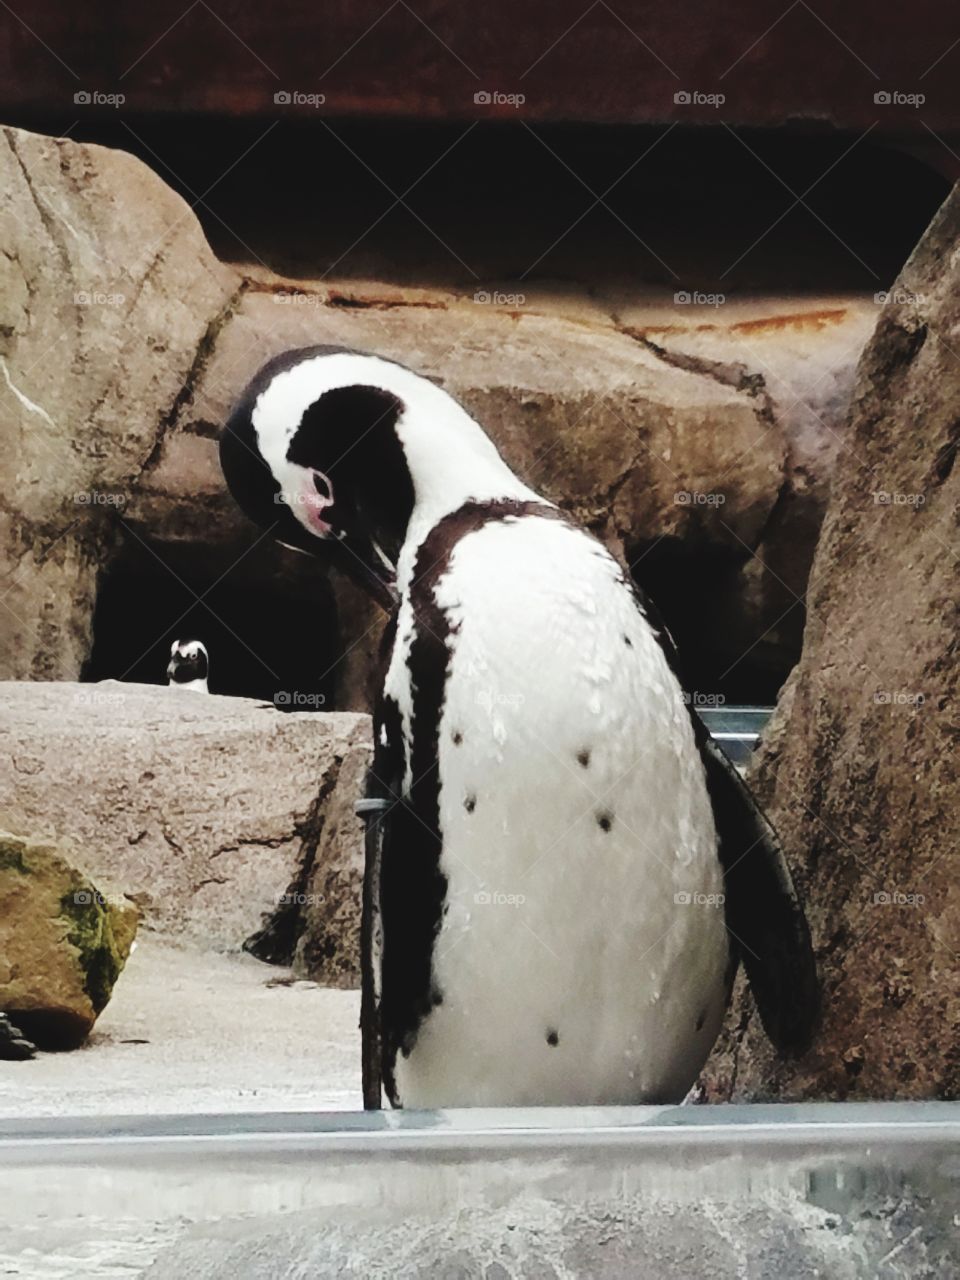 Up close with a penguin.